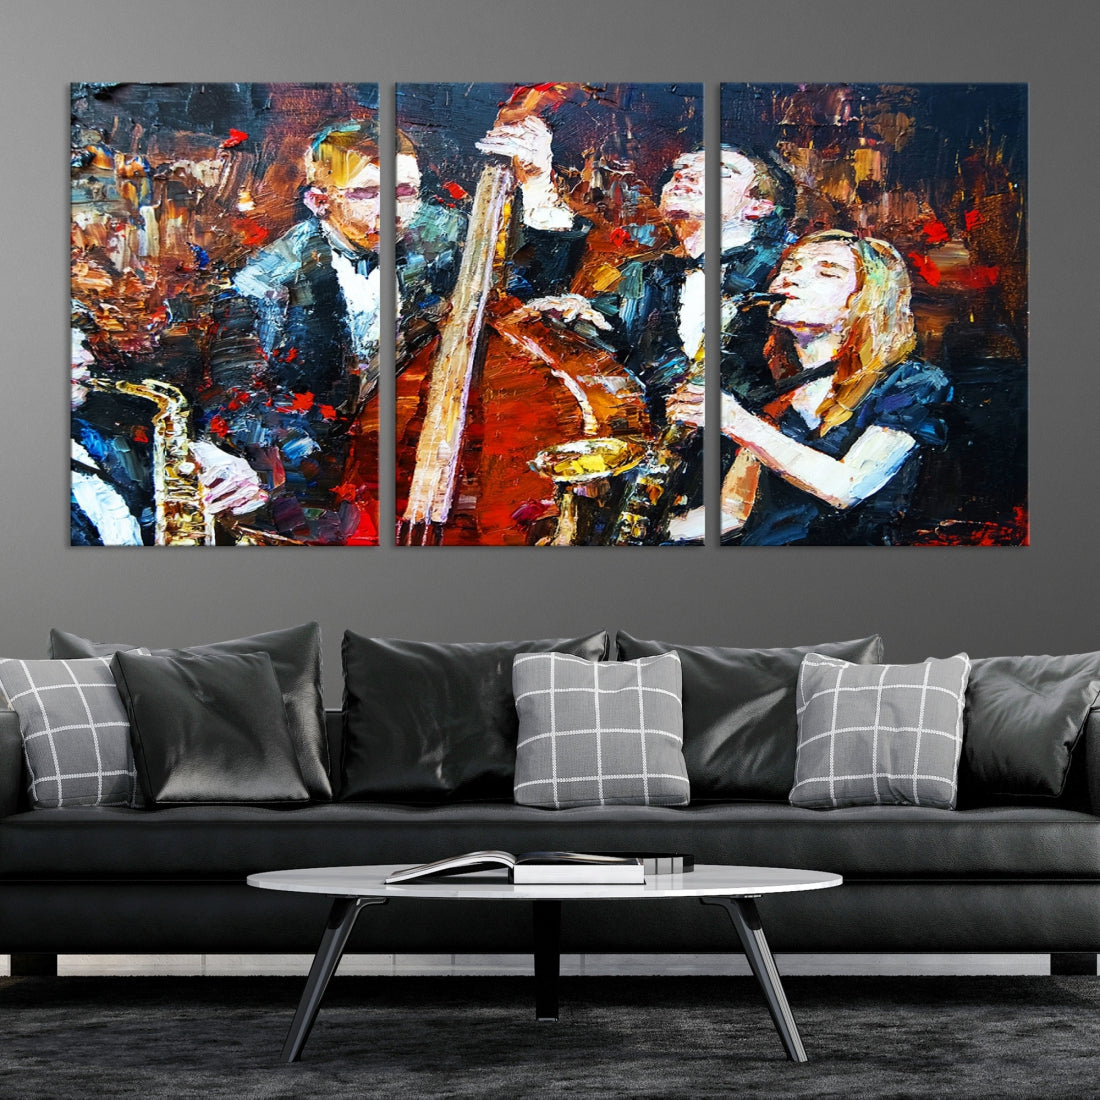 Soulful Sound of Jazz with Our Abstract Afro American Jazz Musician Wall Art Canvas Print